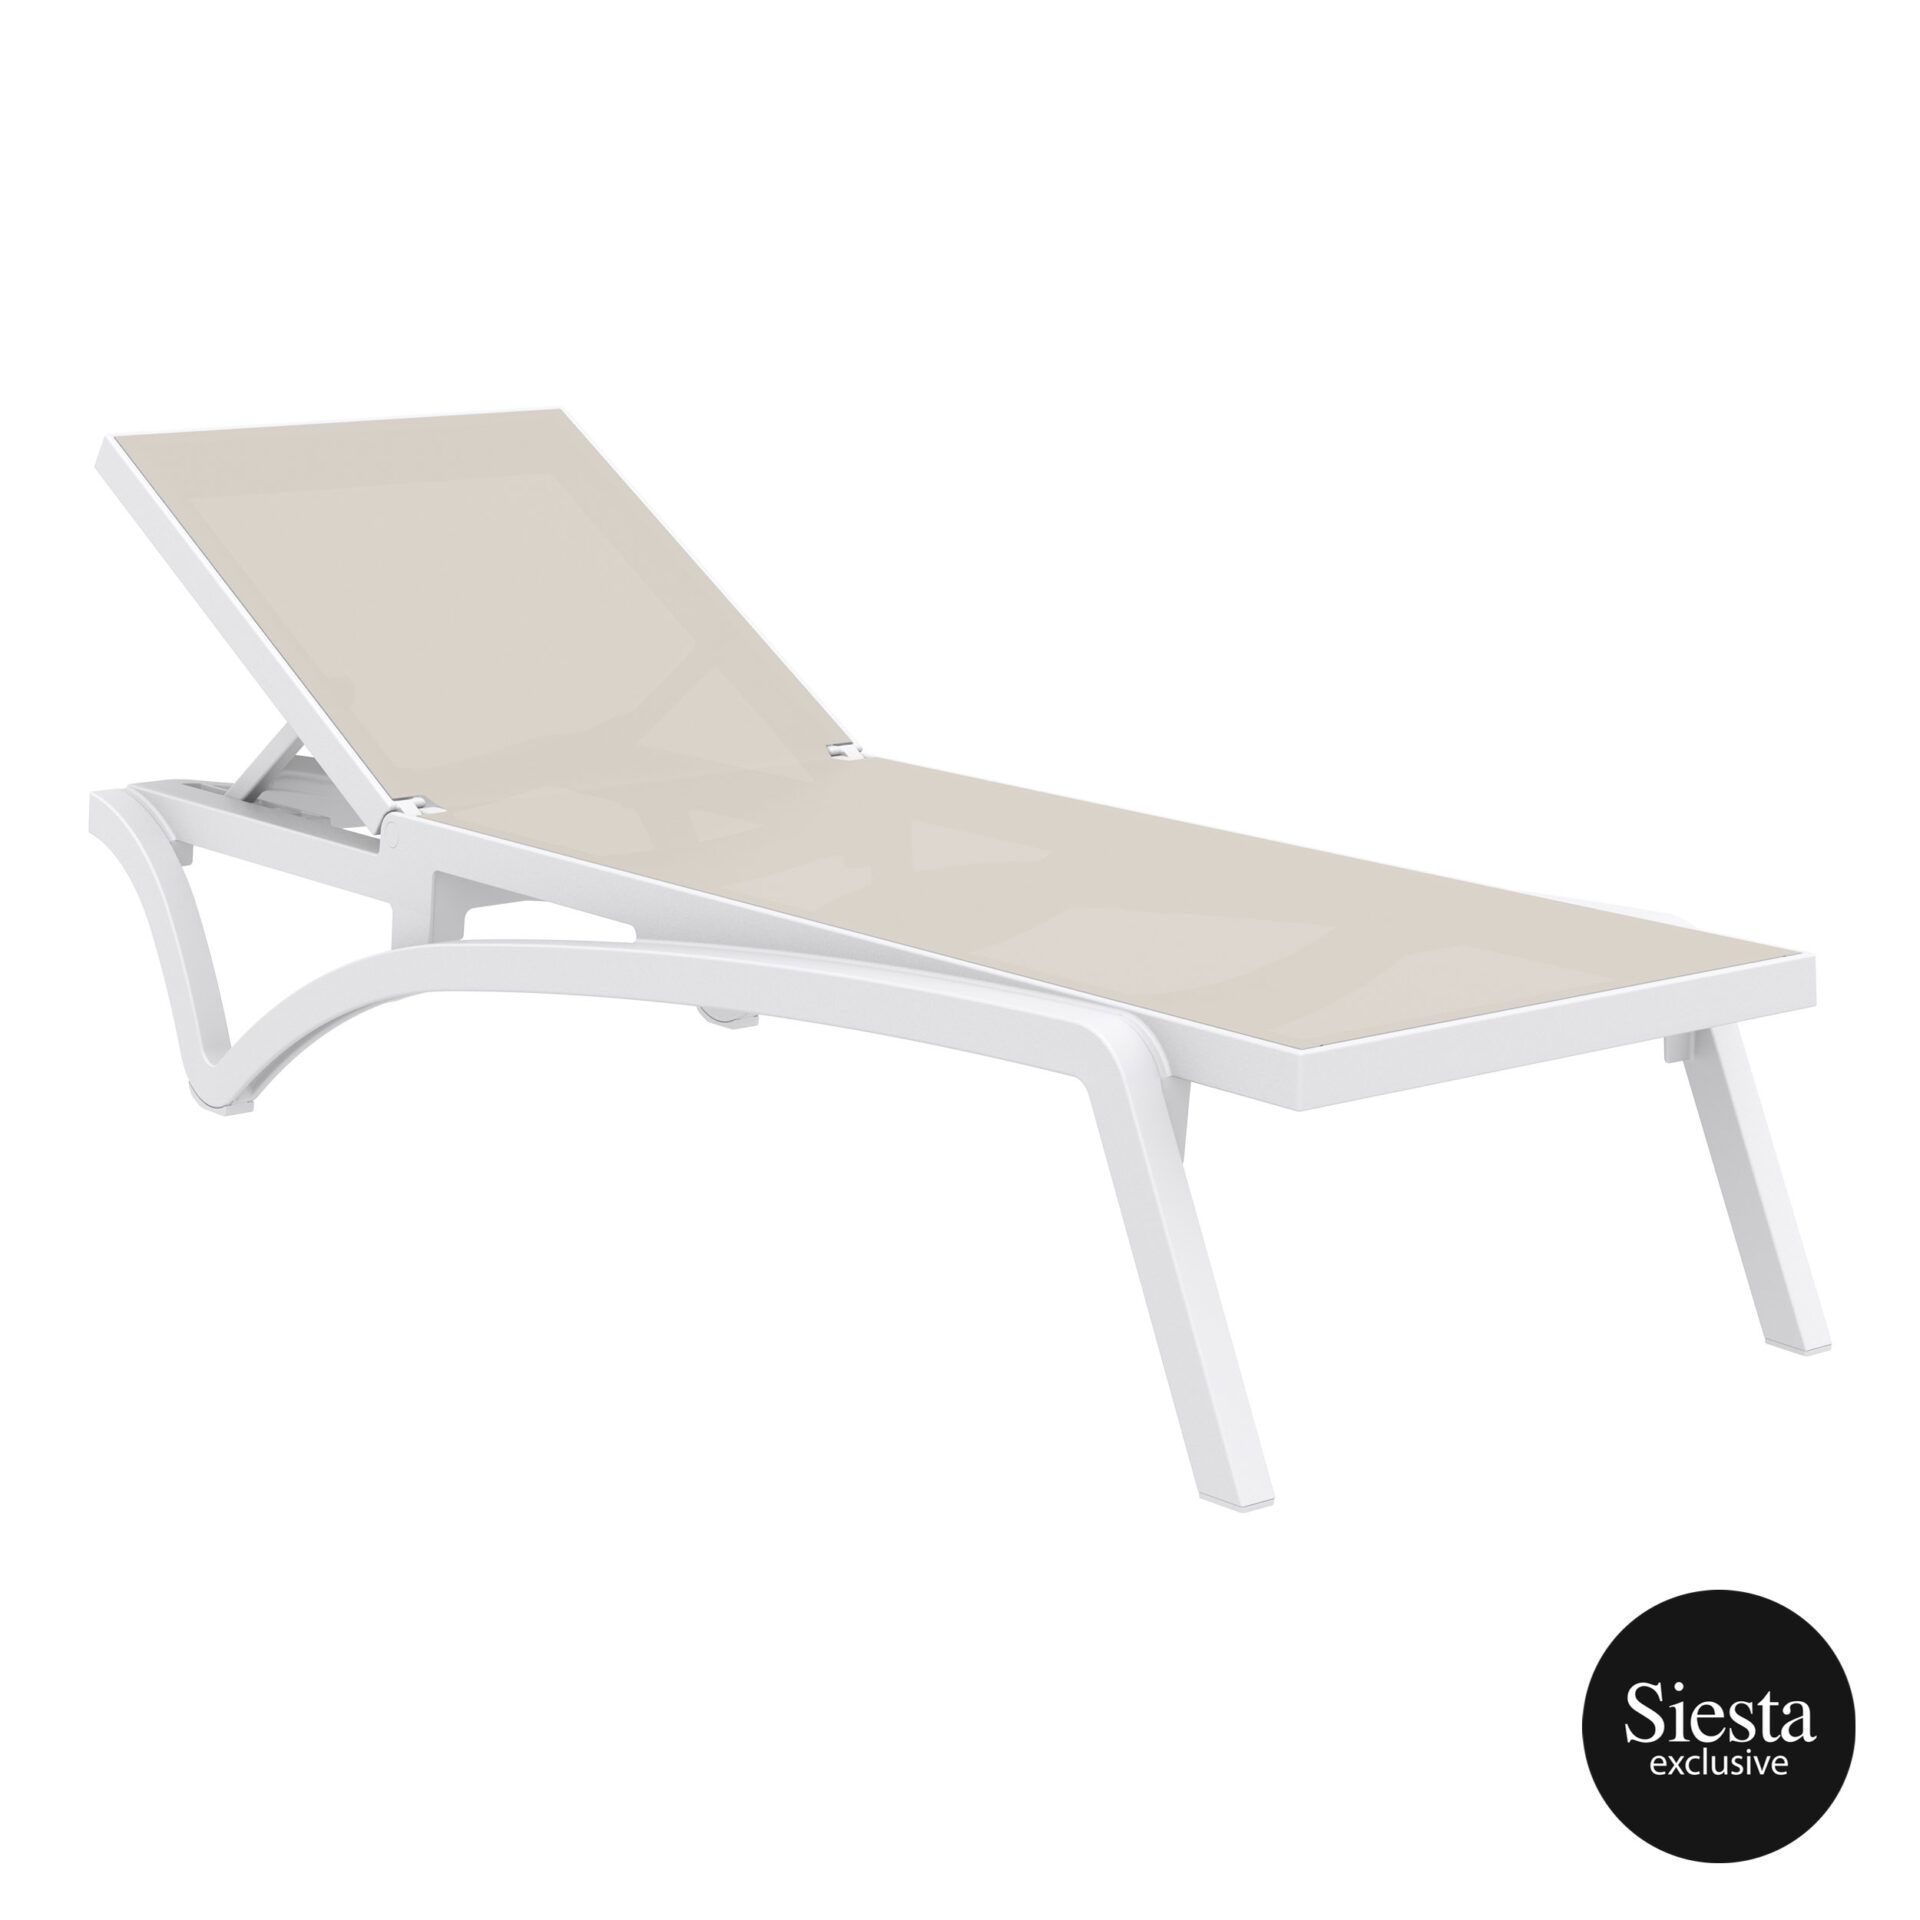 Pacific Sunlounger - White/Taupe